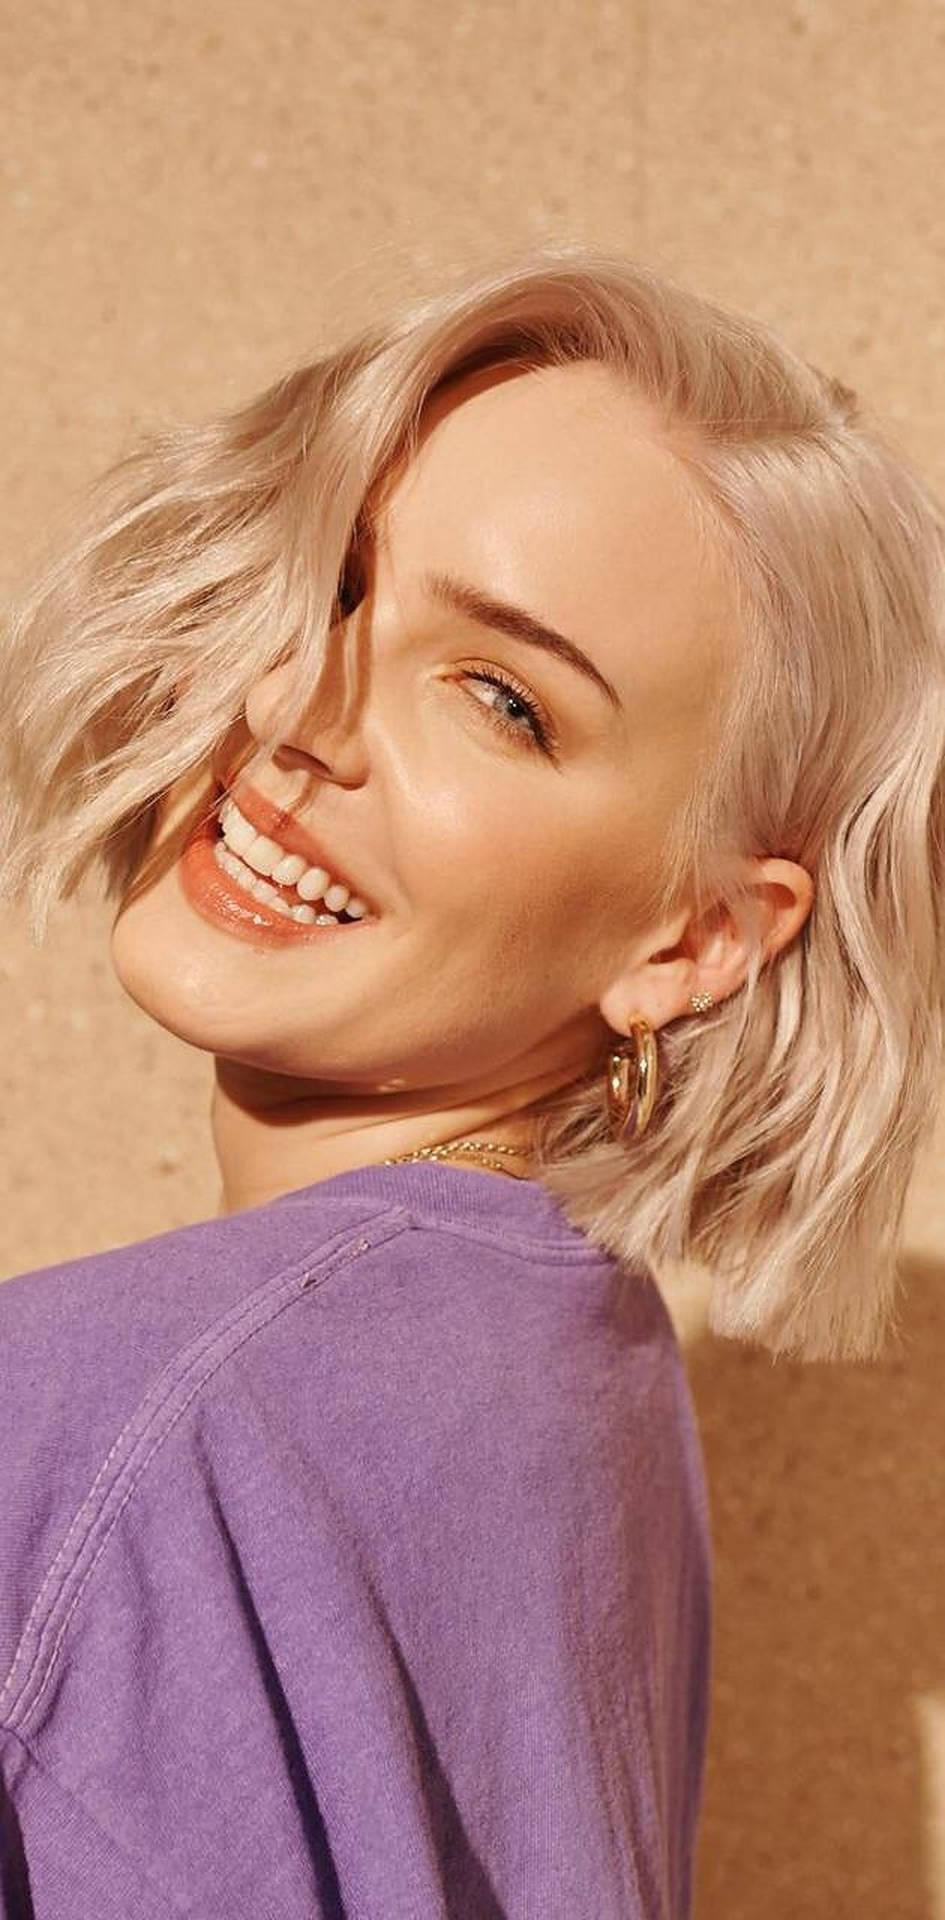 Anne-marie Smiling